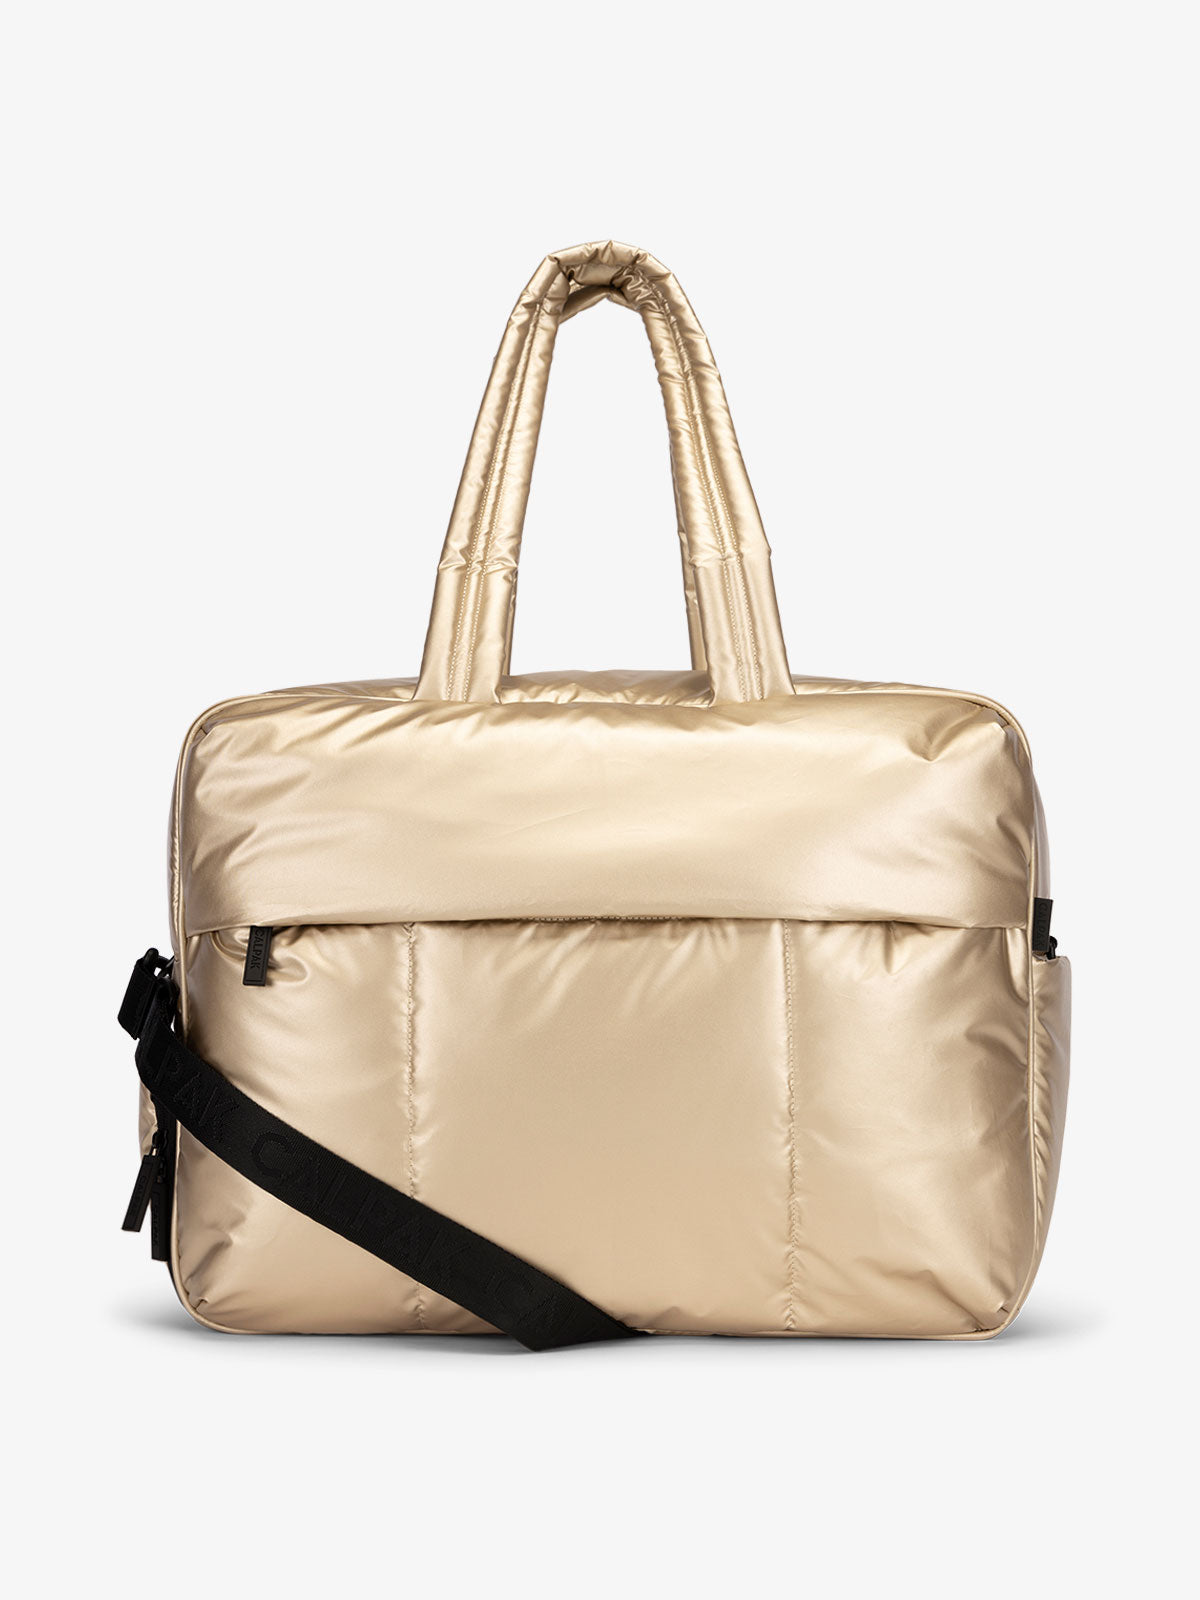 CALPAK Luka large duffle bag with detachable strap and zippered front pocket in metallic gold; DLL2201-GOLD